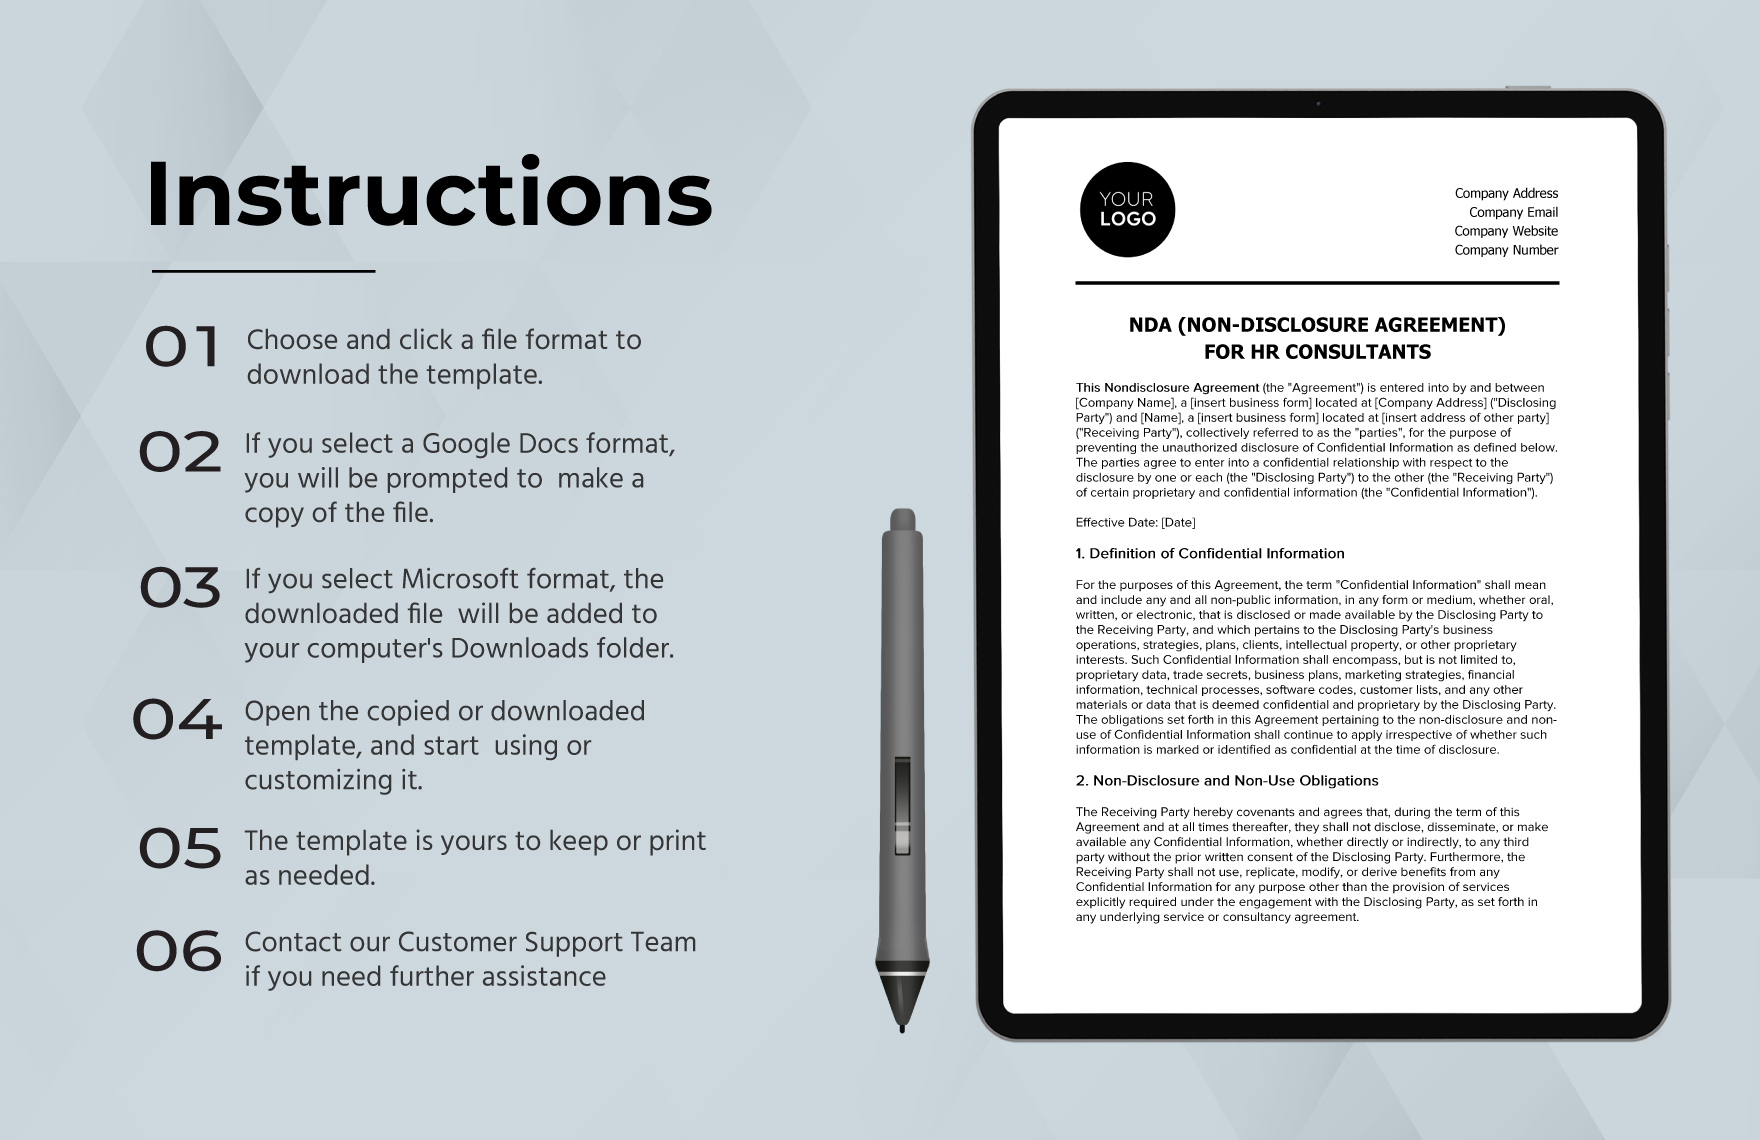 NDA (Non-Disclosure Agreement) for HR Consultants Template